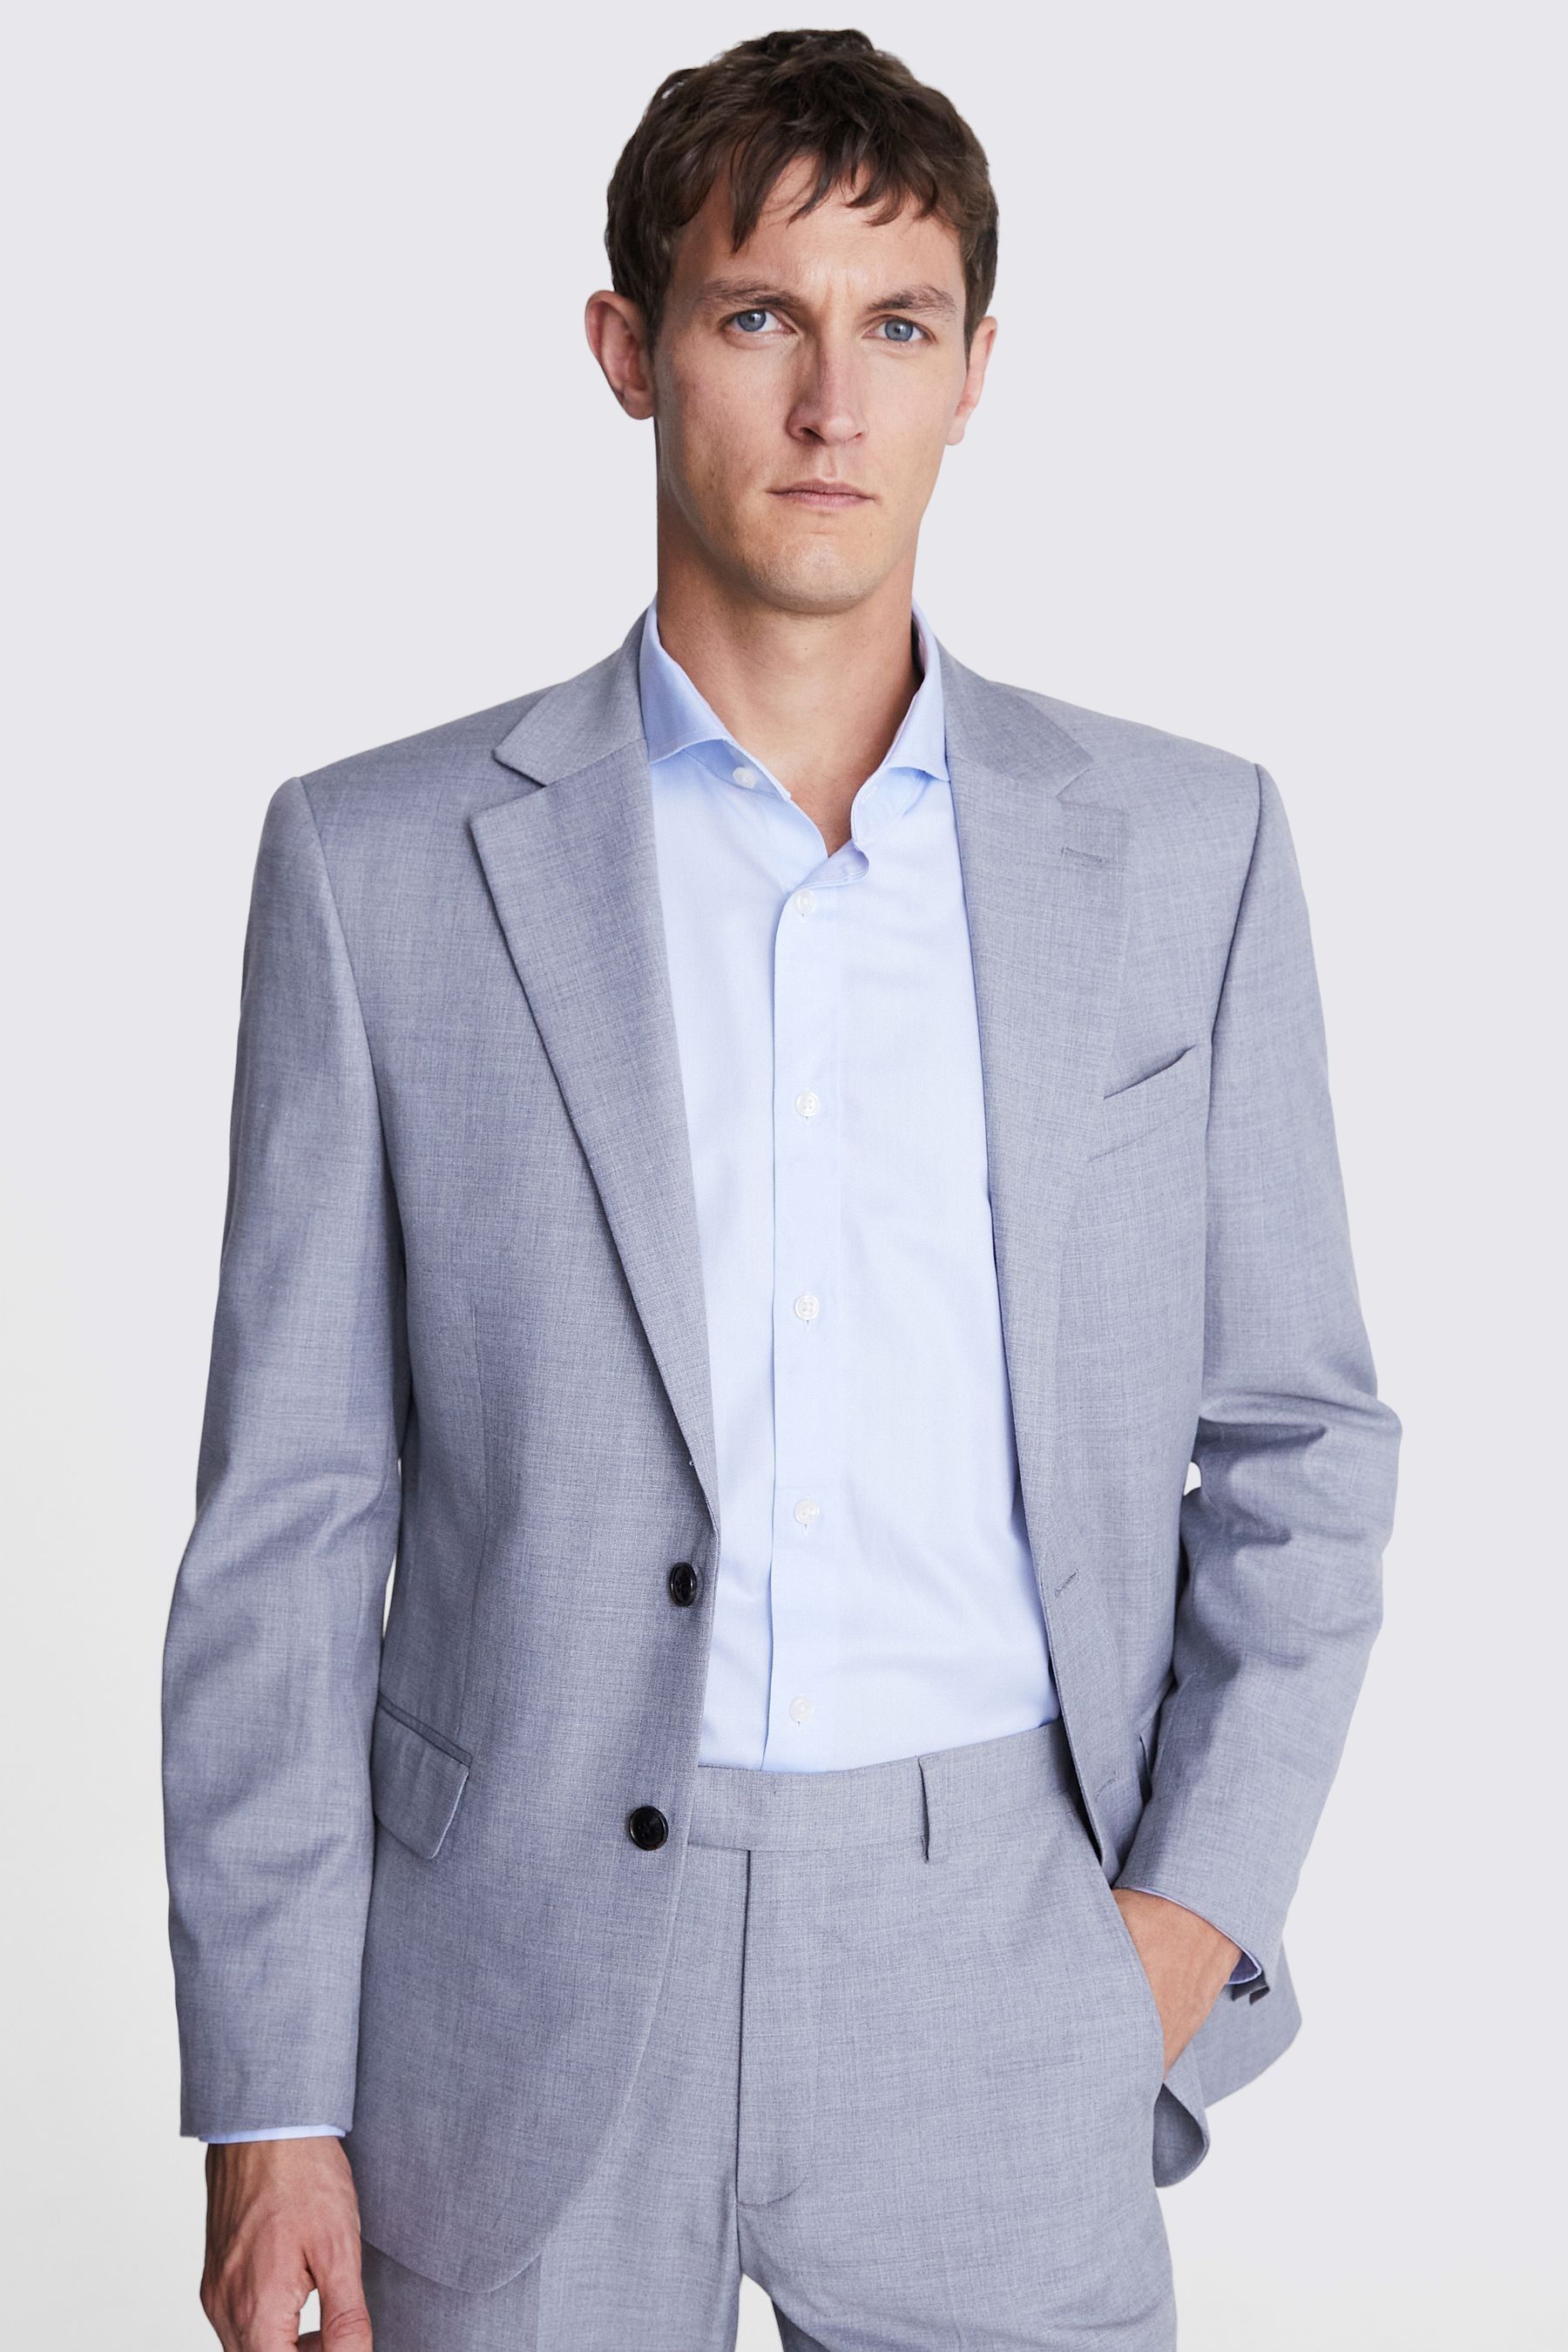 Buy MOSS Slim Fit Grey Stretch Suit: Jacket from the Next UK online shop